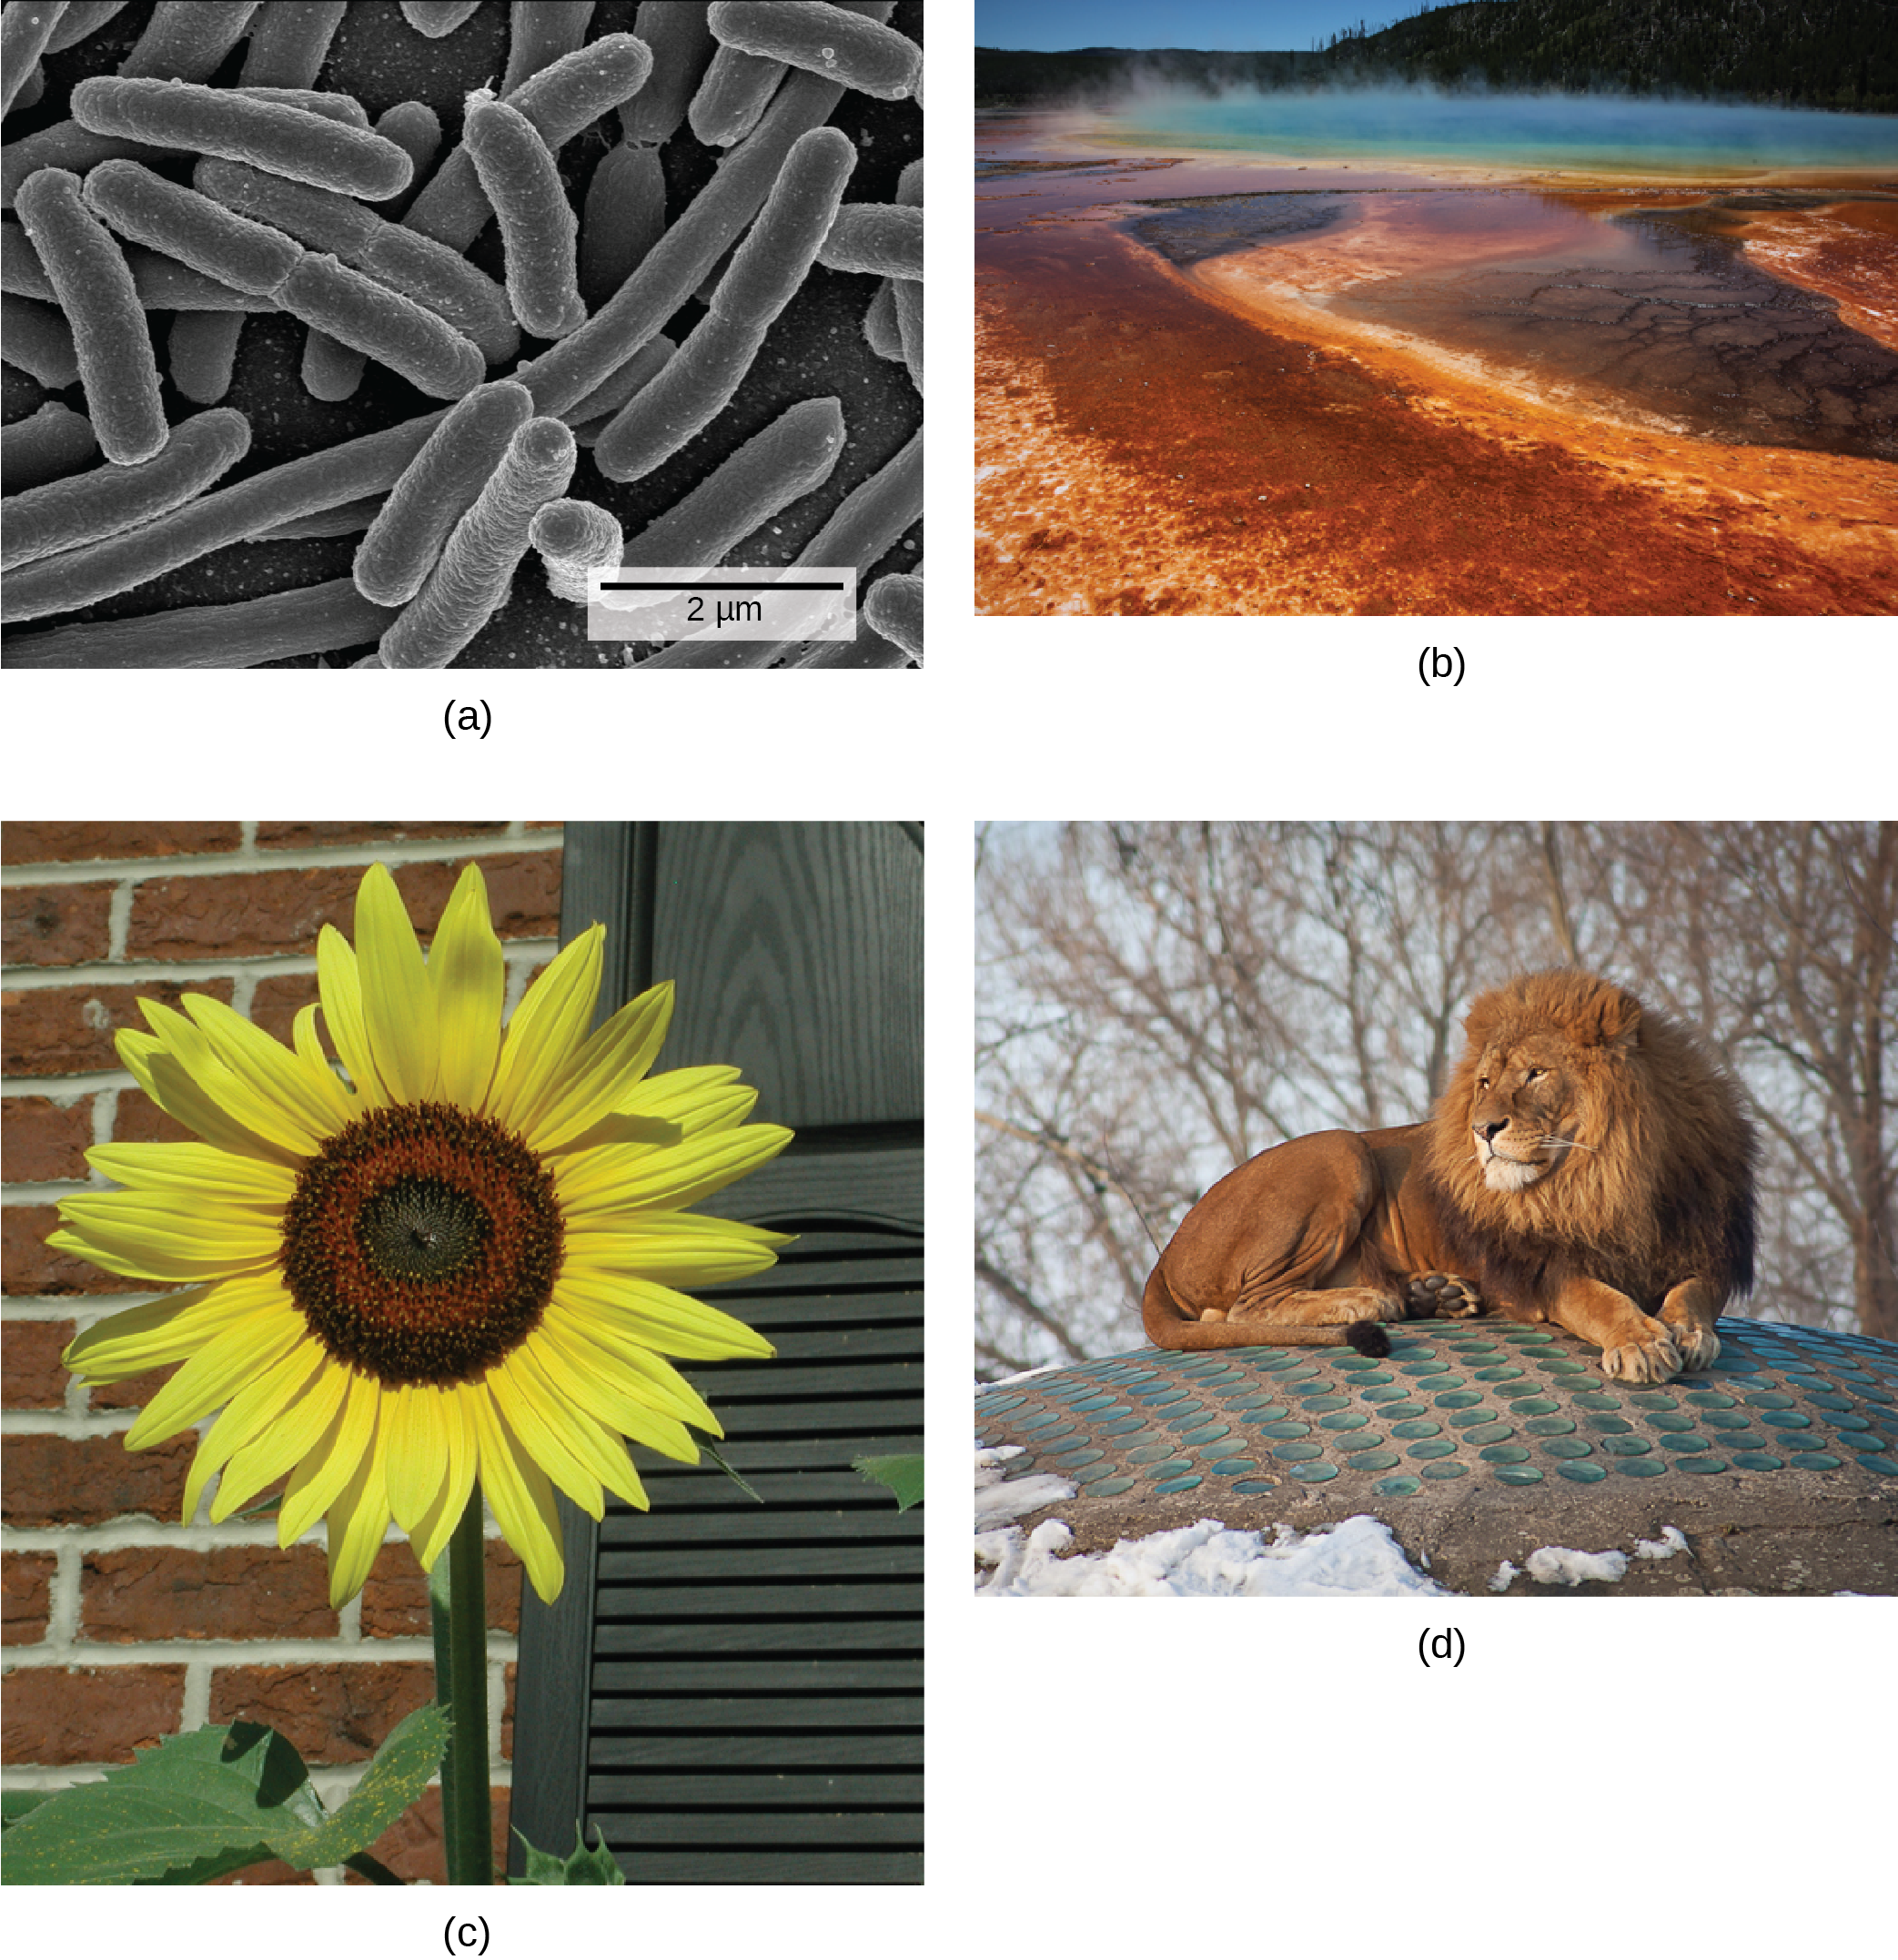 There are four photos shown. The first photo is a micrograph, showing tubelike bacterial. The second photo shows a steaming body of water, refered to as a hot vent. Some of the water is a typical blue, while the outer edges are rust colored. The third picture shows a tall sunflower, with a thick stem and bright yellow petals. The fourth photo shows a muscular lion that has a thick mane of hair around its neck and head.